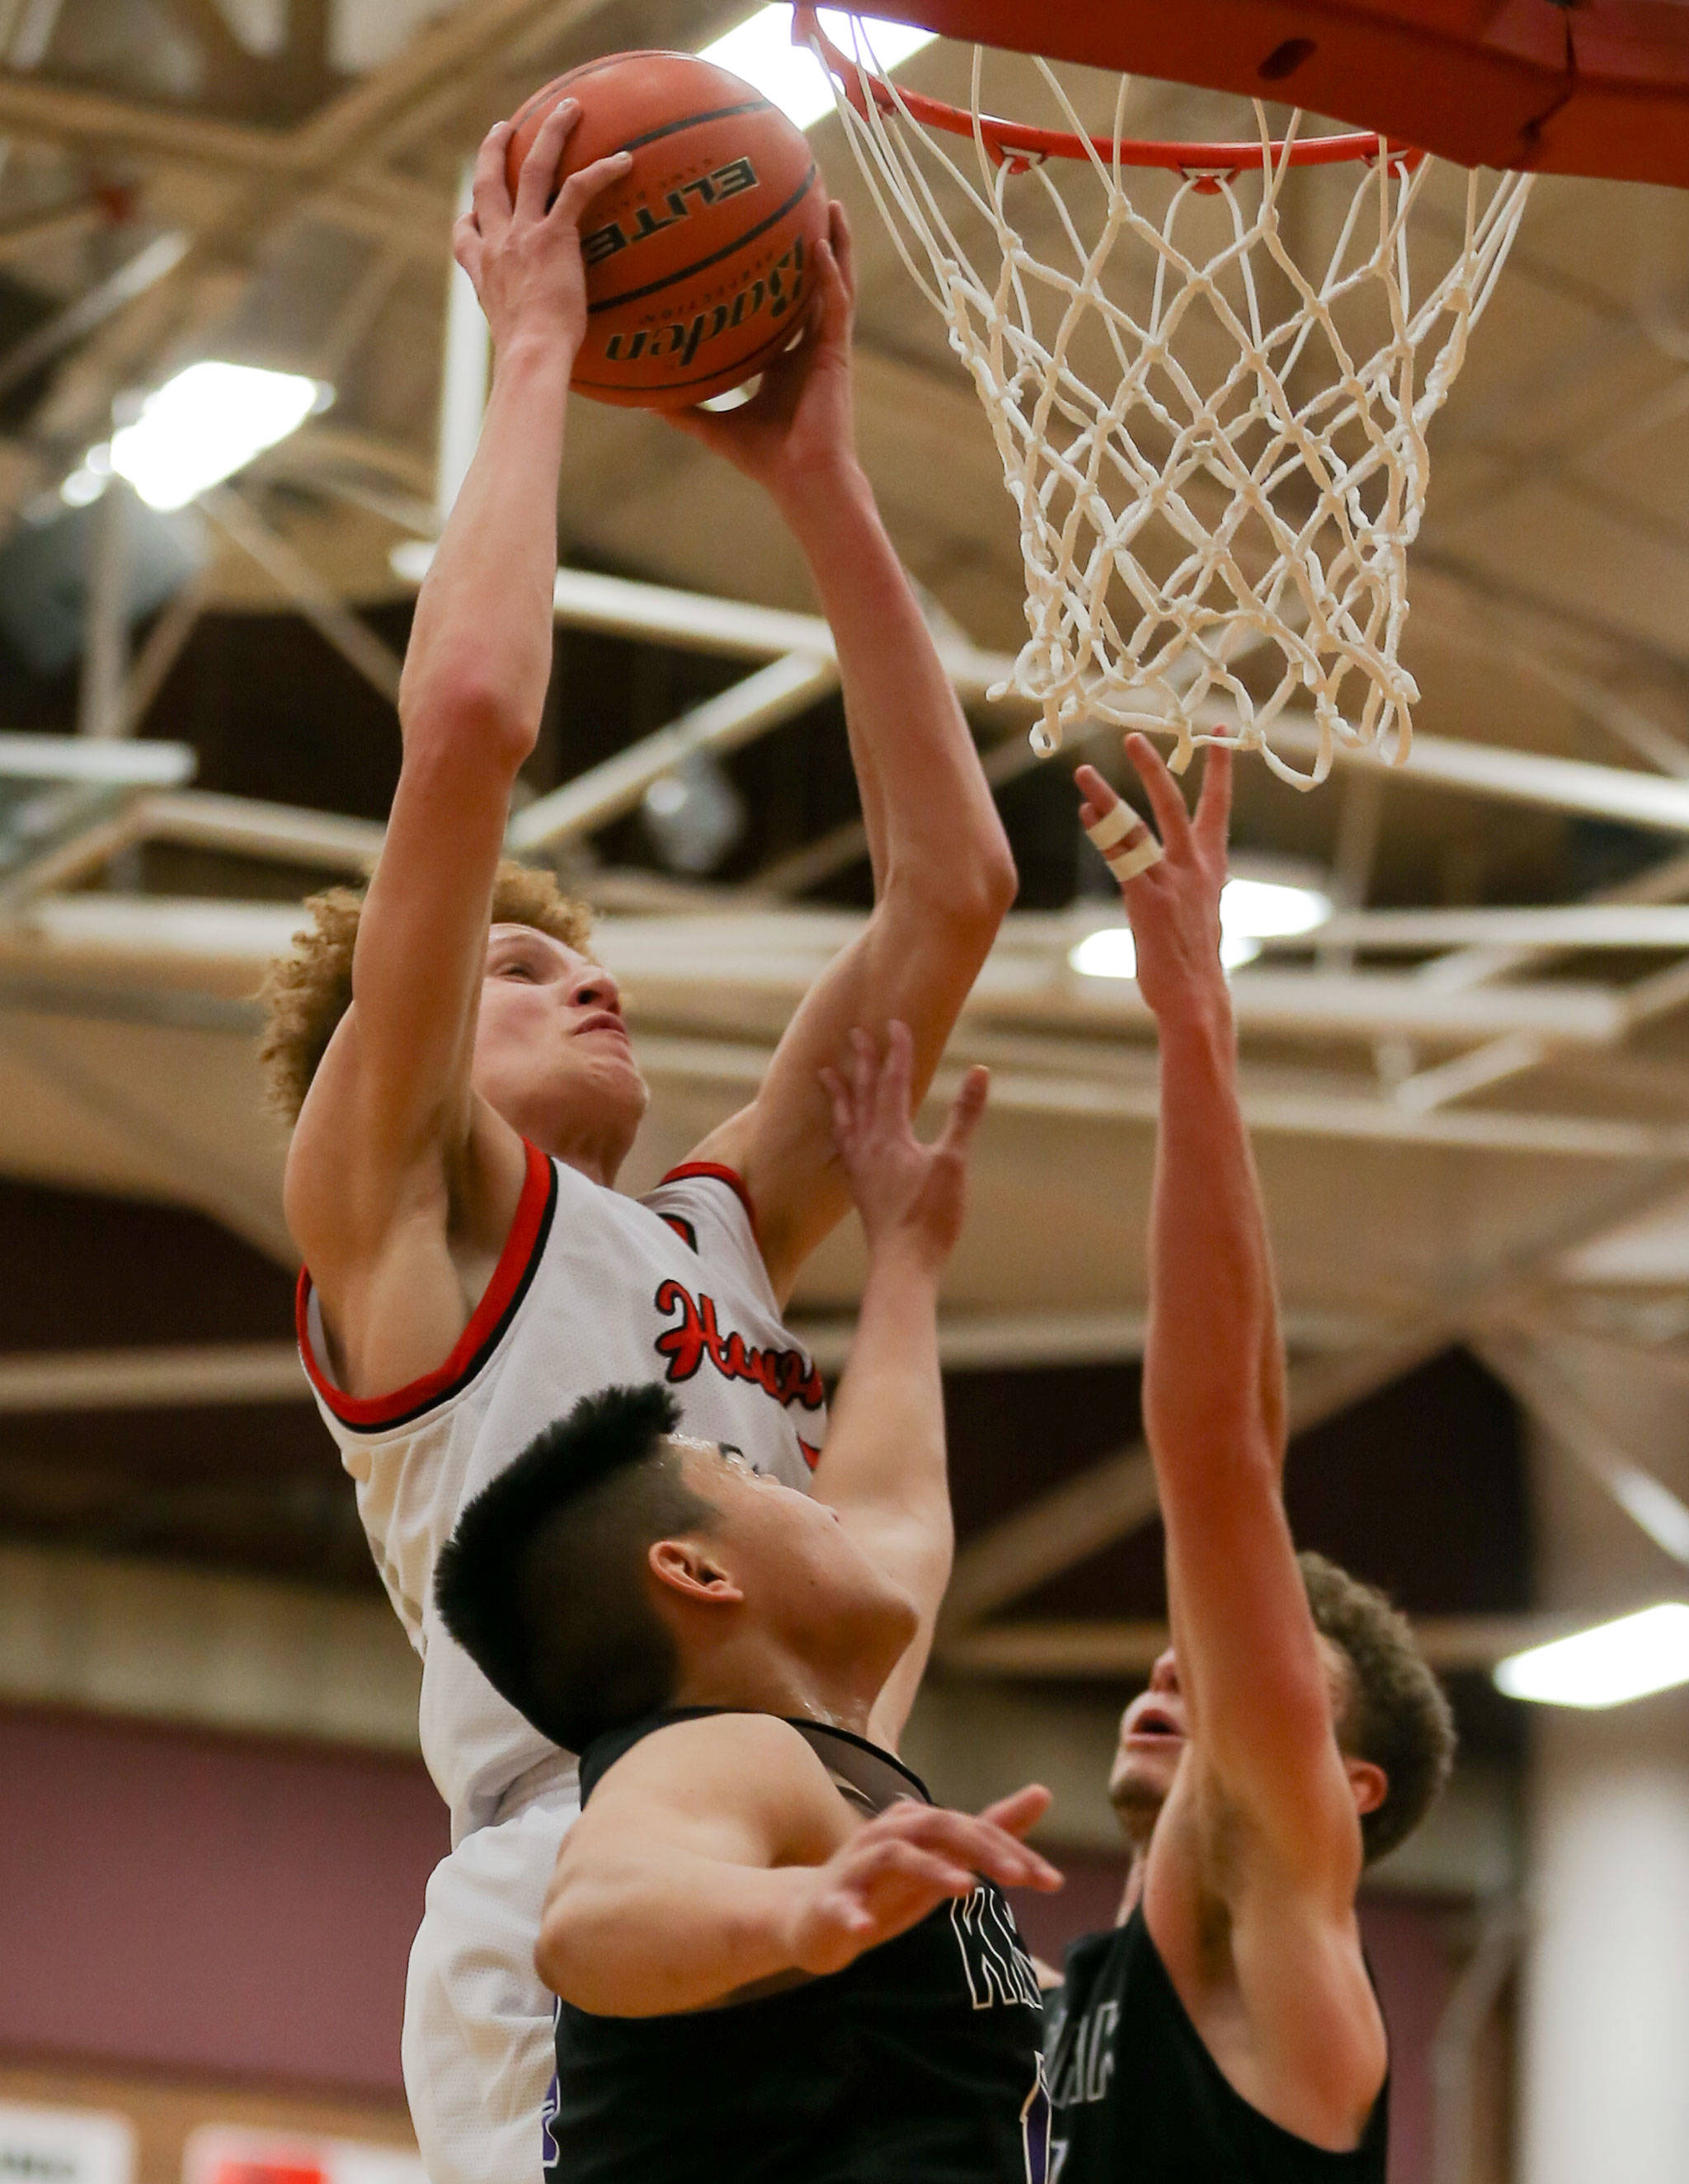 Mountlake Terrace’s Khyree Armstead rebounds for a dunk over Kamiak’s Patrick Olson (bottom left) and Daniel Sharpe during a game Nov. 29, 2017, at Mountlake Terrace High School. The Hawks won 63-59. (Kevin Clark / The Herald)